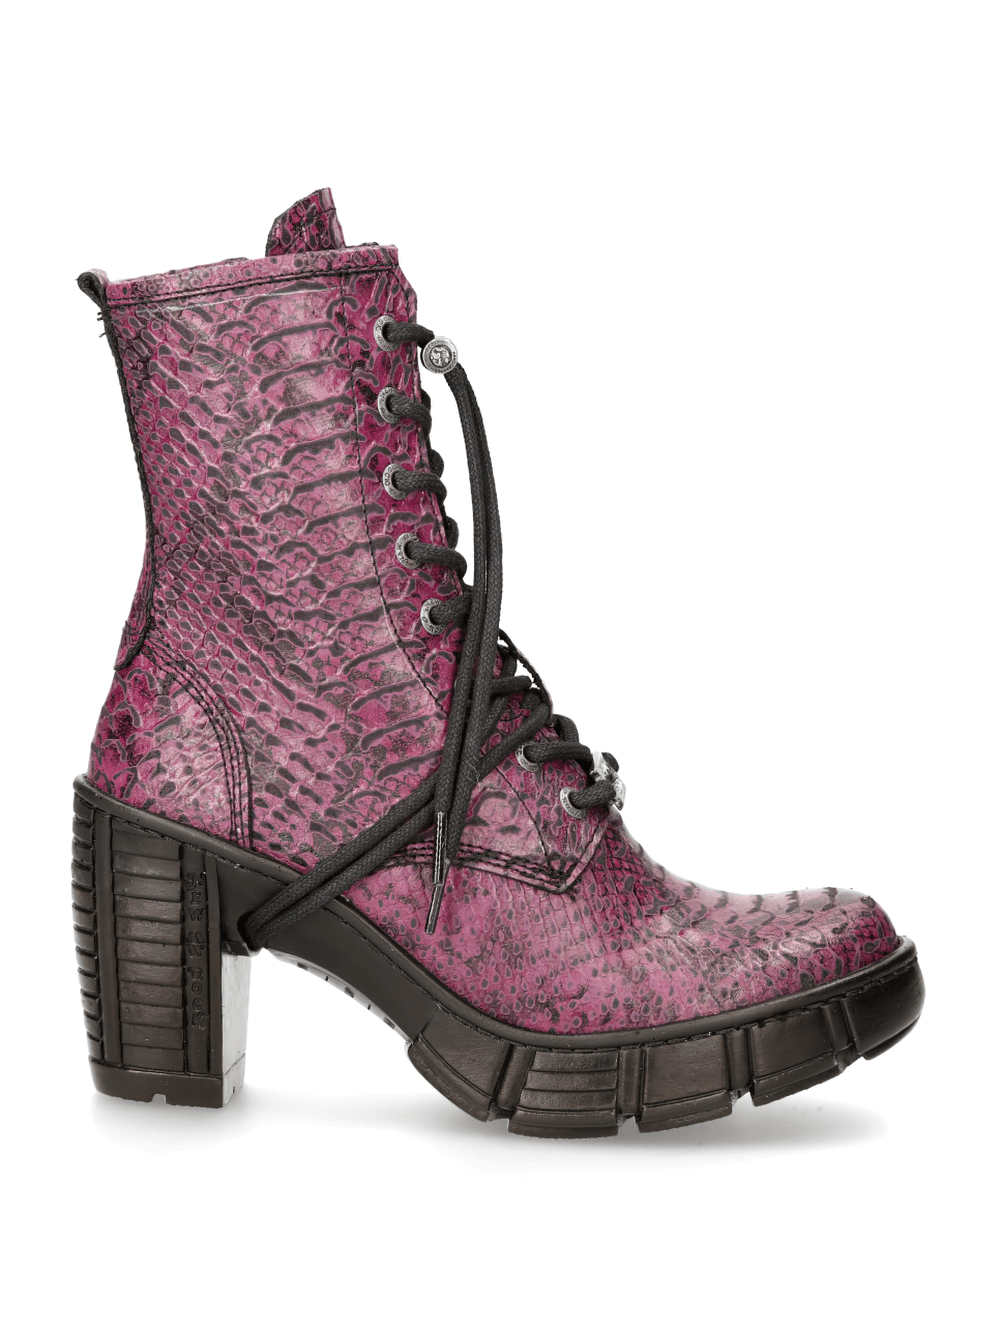 NEW ROCK Urban Lace-Up Ankle Boots with Metallic Heels